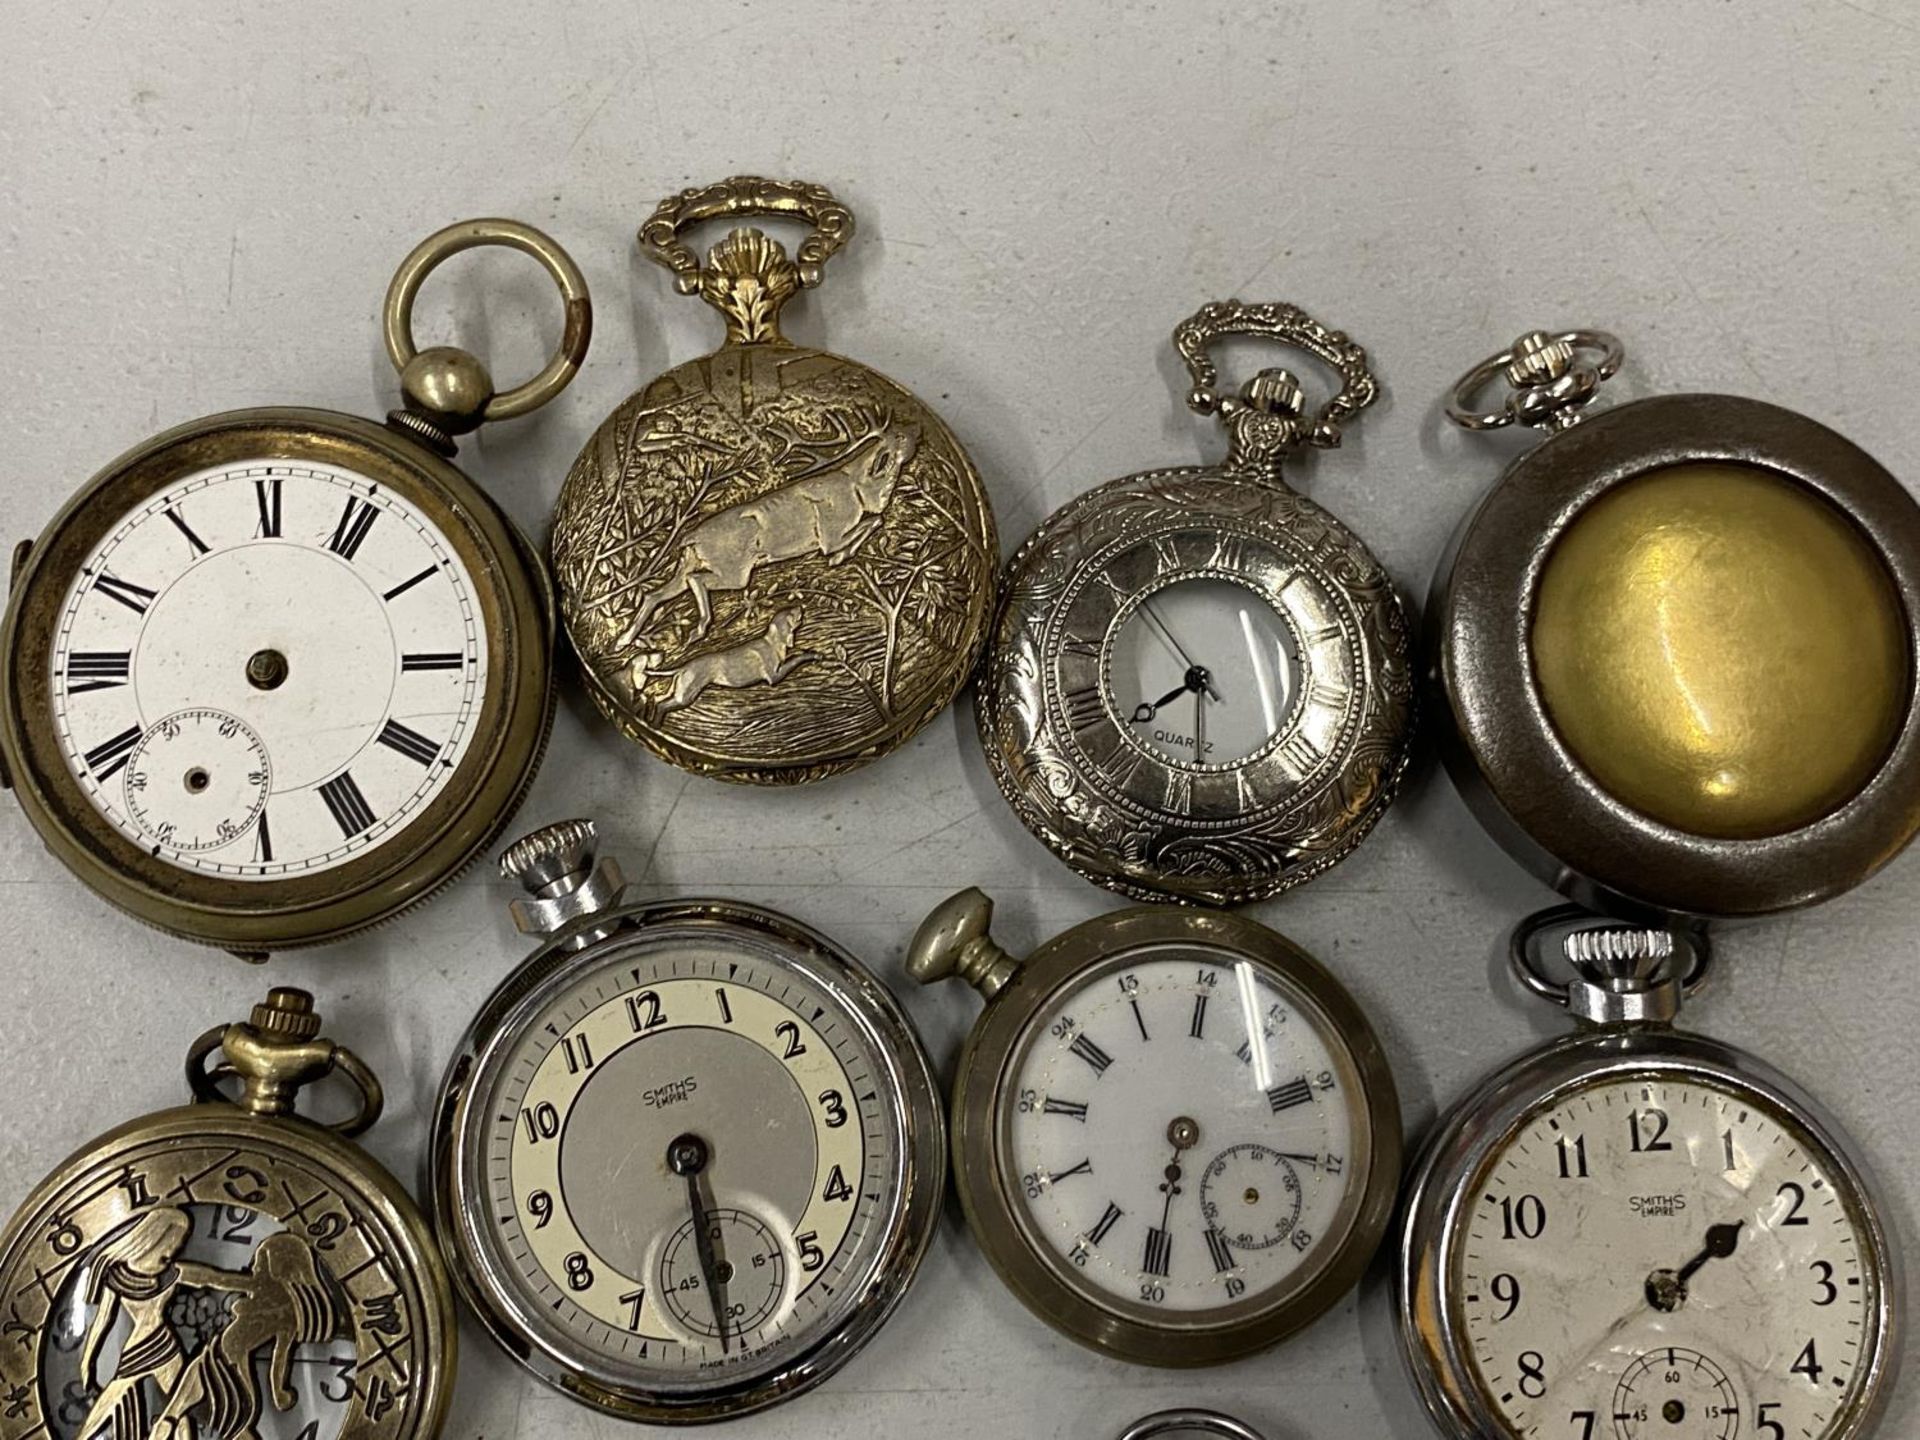 A MIXED GROUP OF MODERN AND VINTAGE POCKET WATCHES - Image 3 of 3